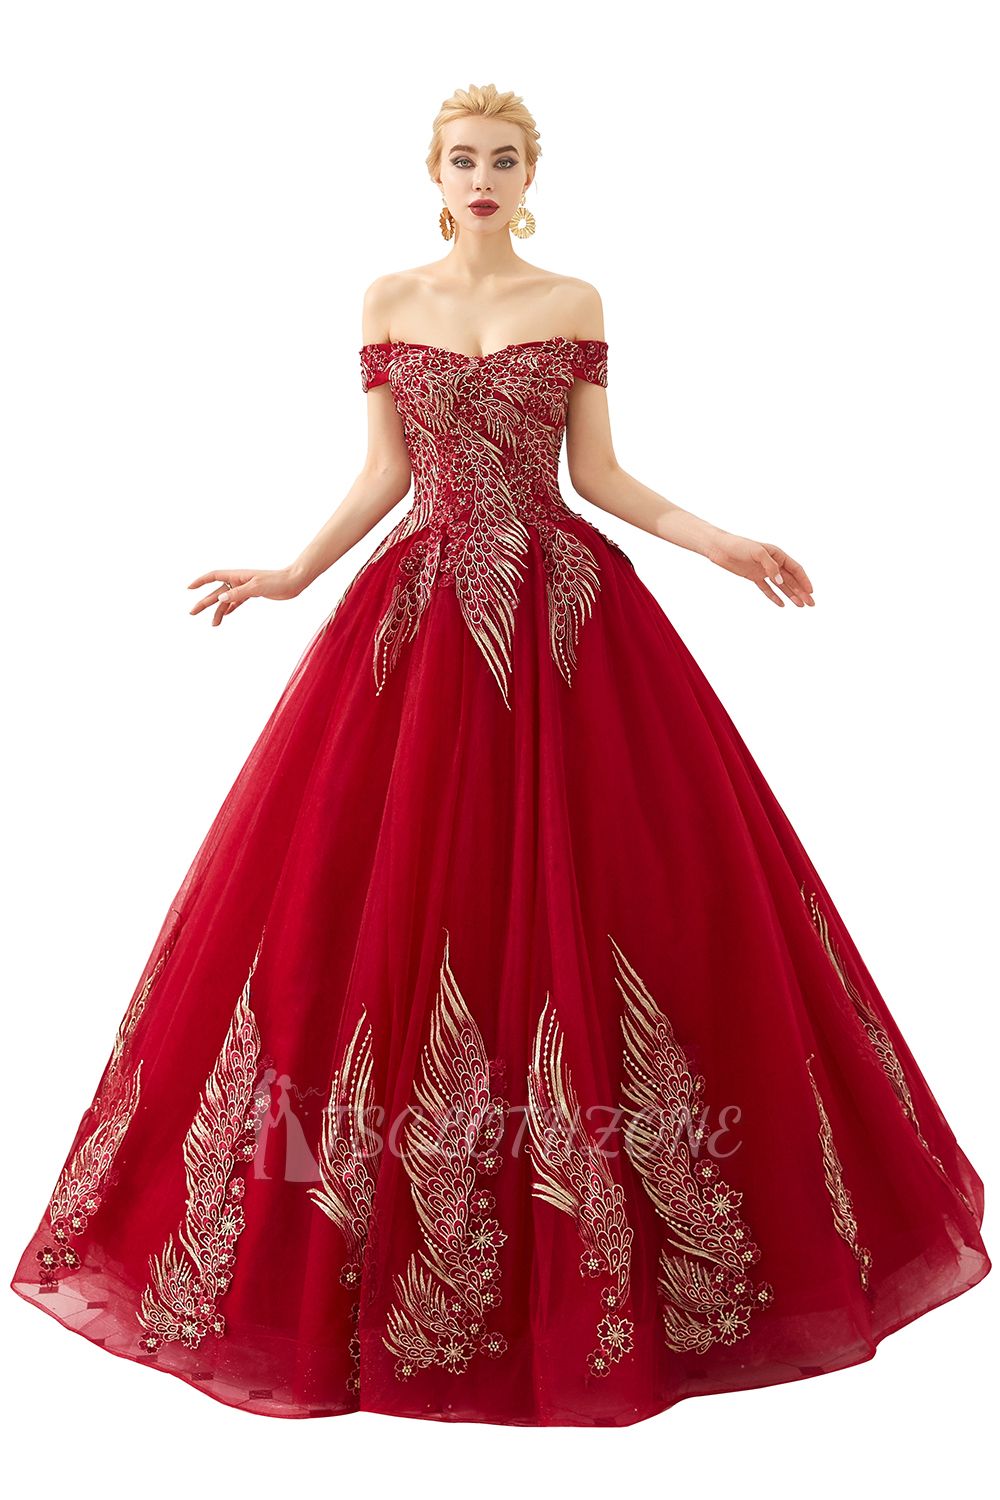 Henry | Elegant Off-the-shoulder Princess Red/Mint Prom Dress with Wing Emboirdery